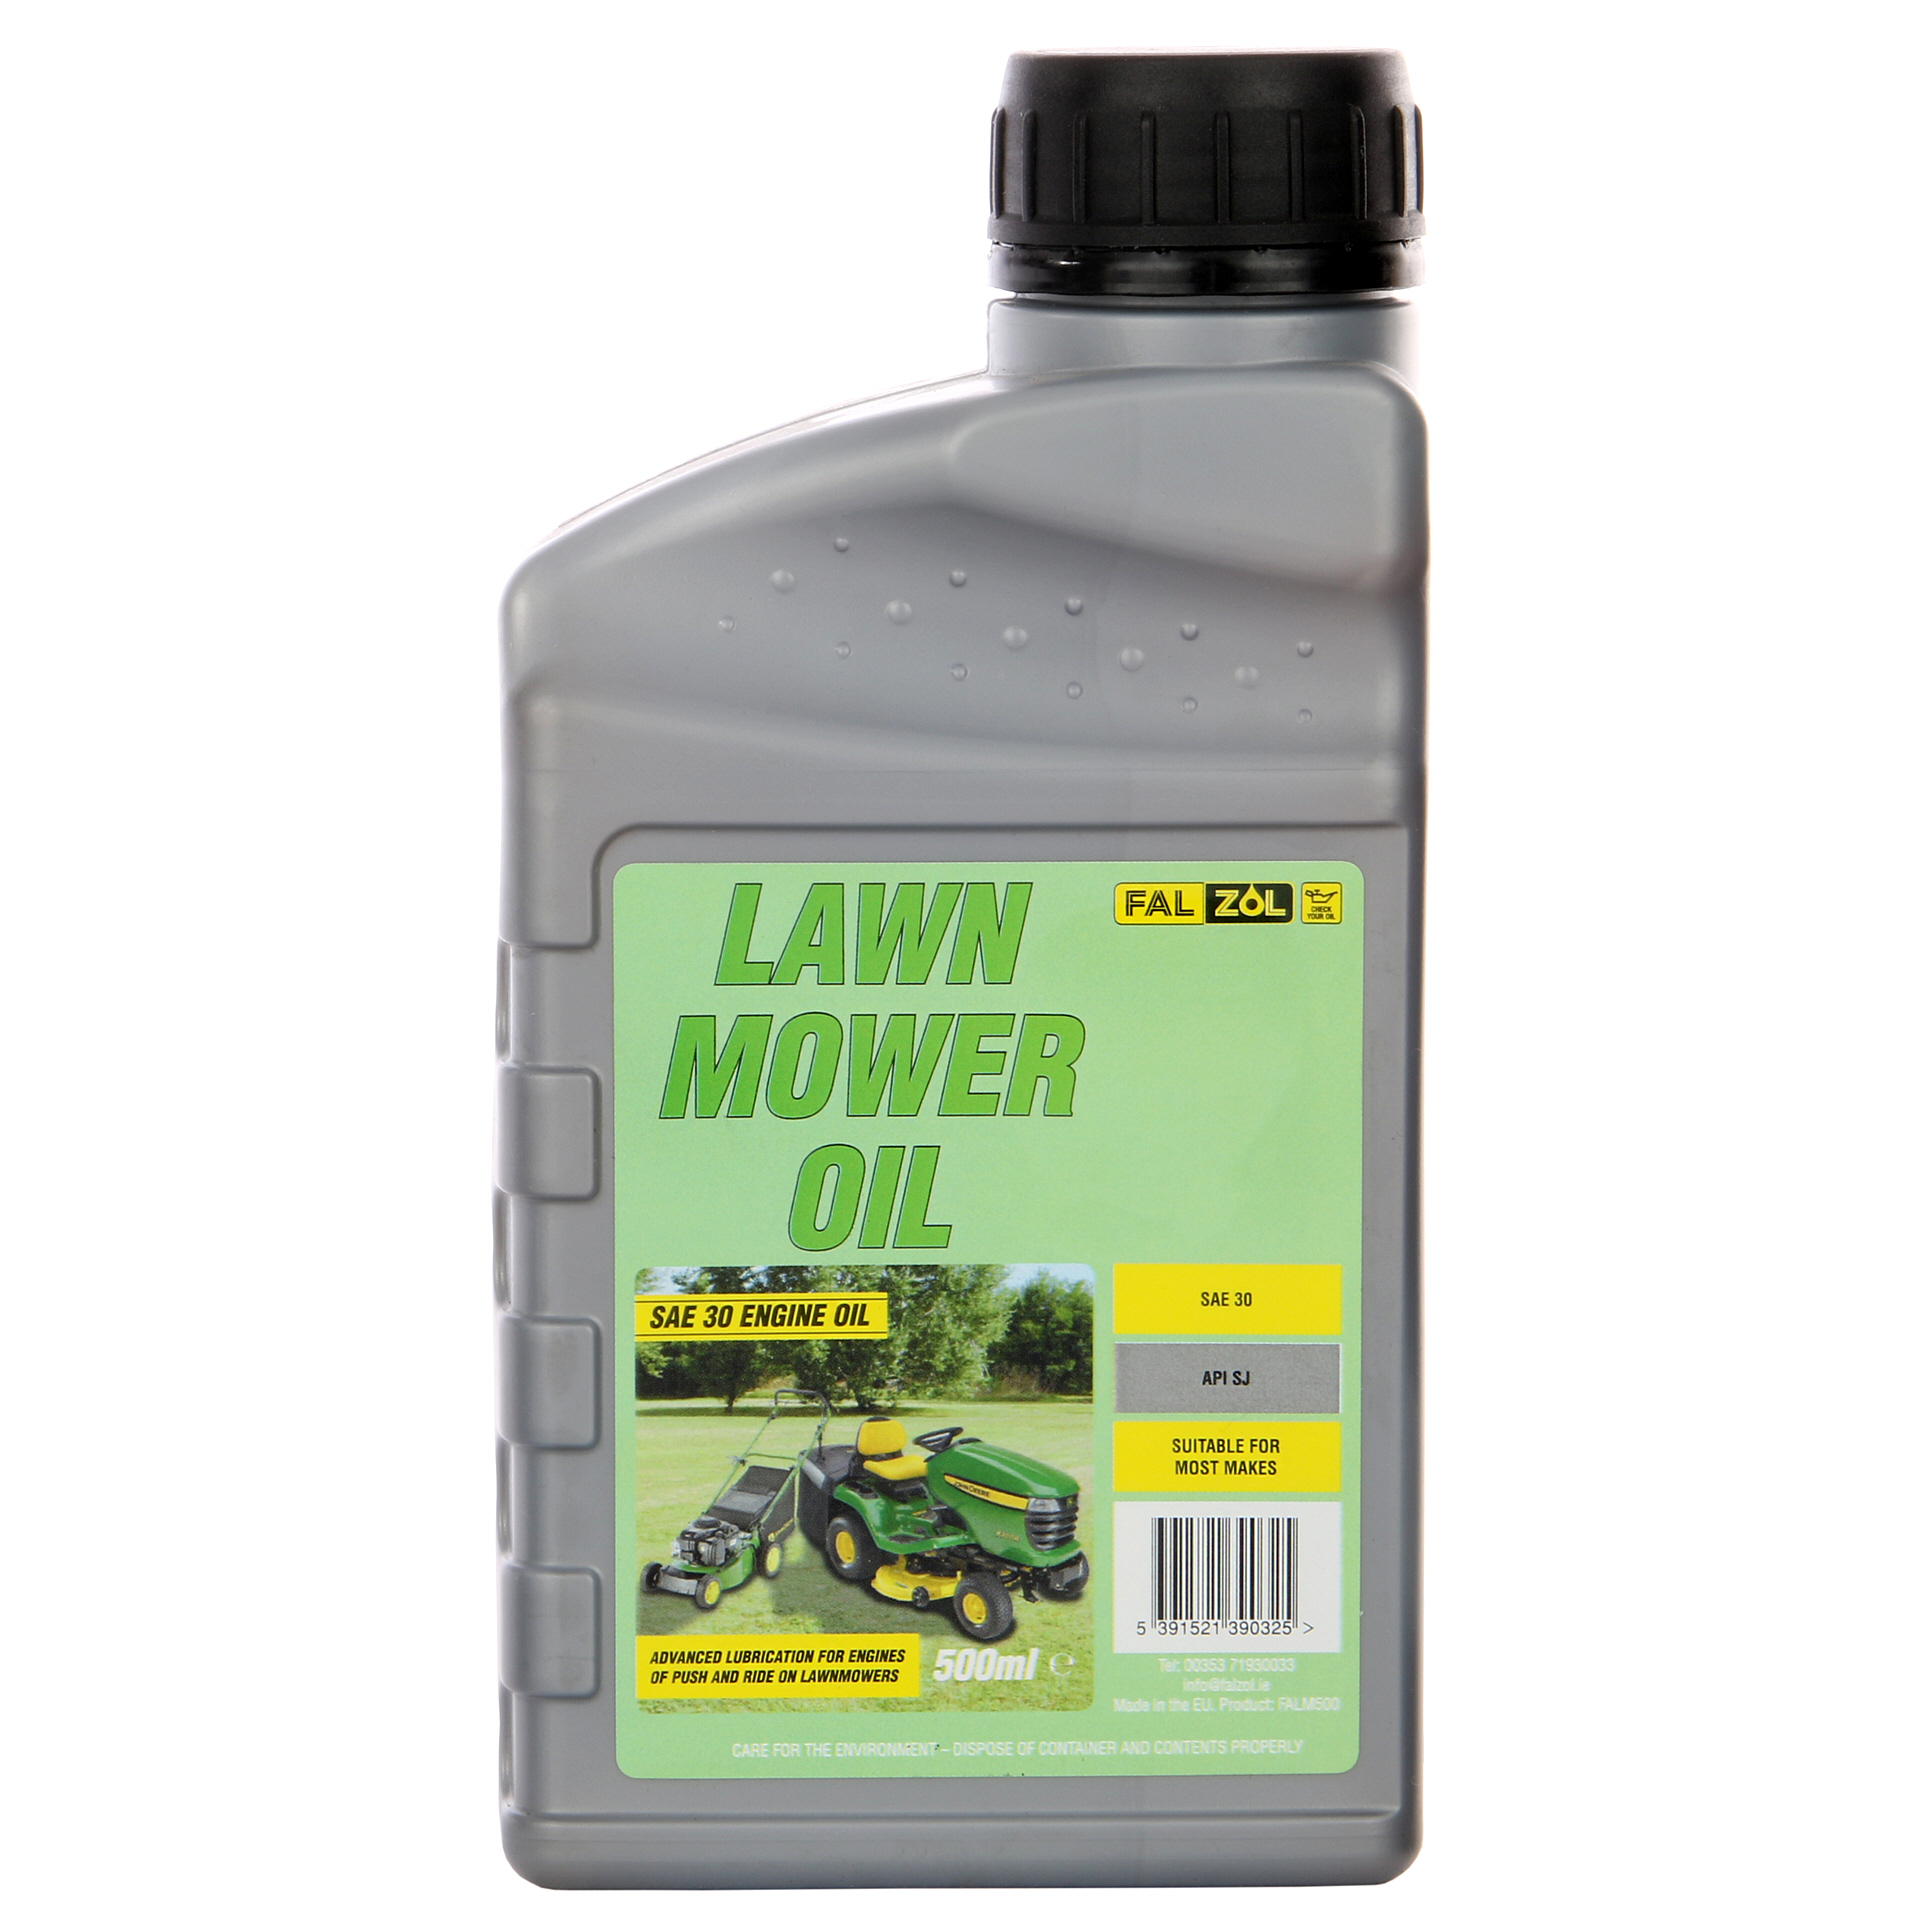 Lawnmower Oil | Oils & Lubricants |Machinery |Farming |Homeland Stores 20 50 Oil In Lawn Mower